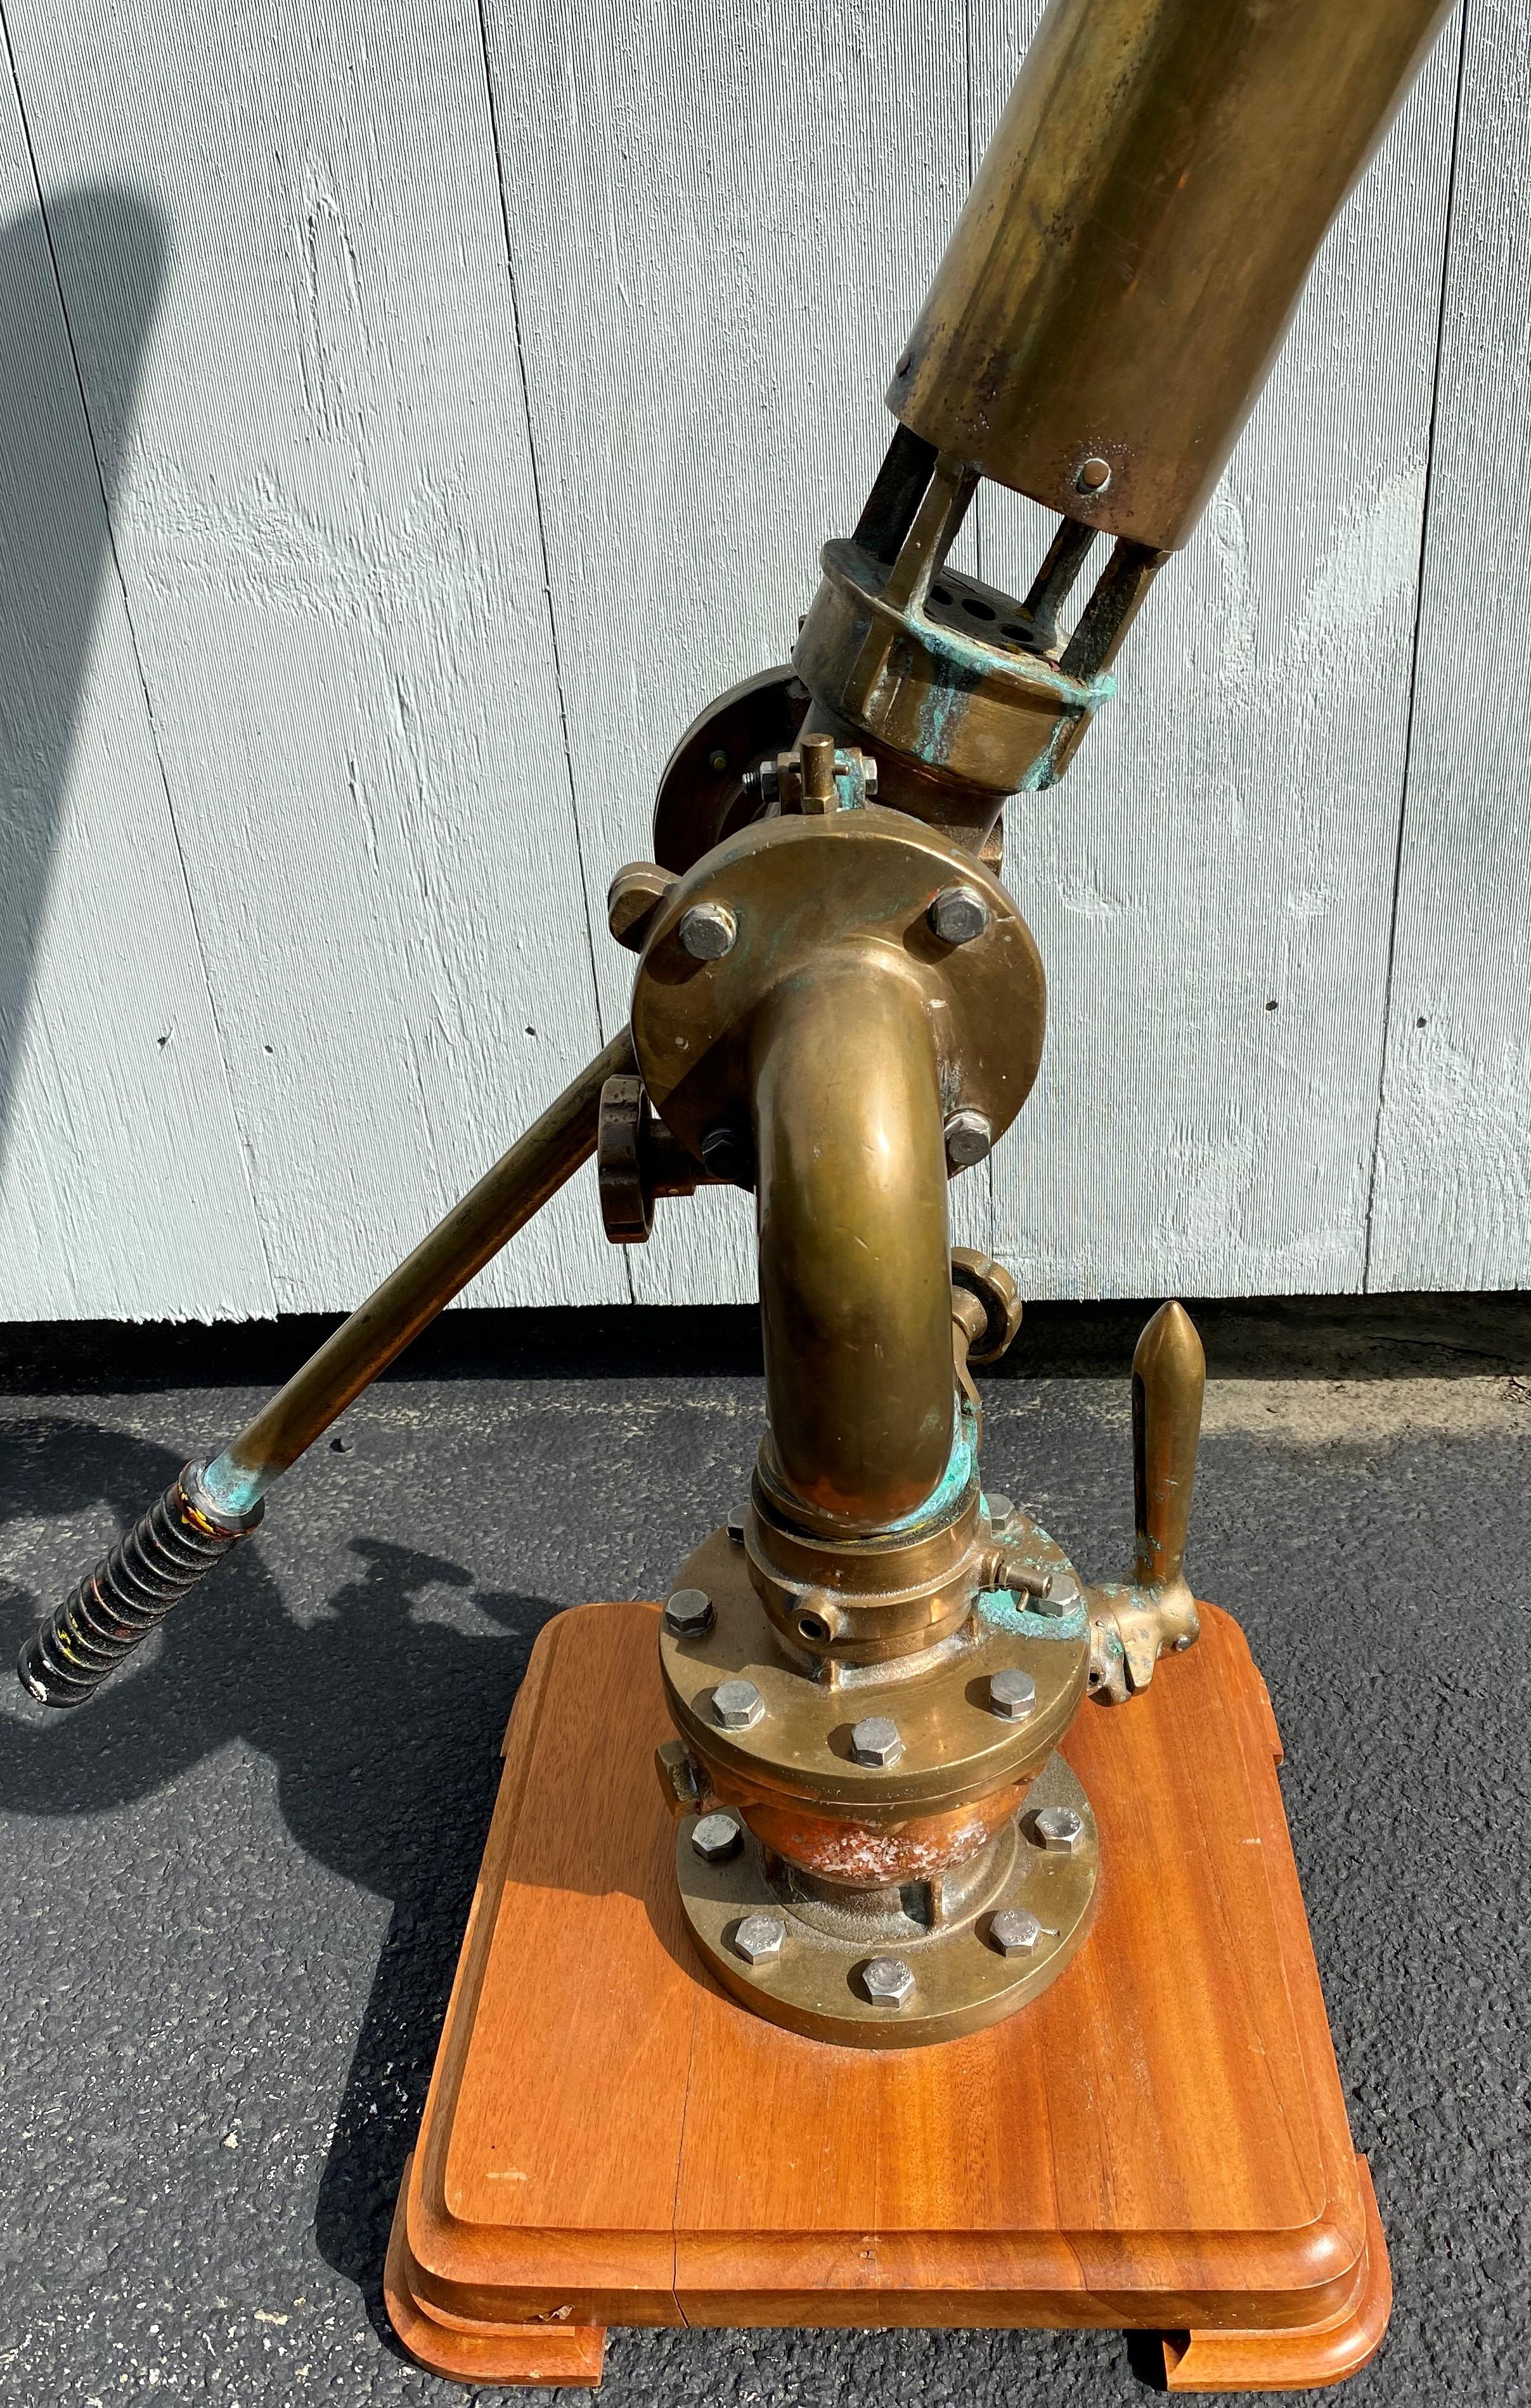 A fine example of a large bronze and copper marine fire monitor or adjustable water cannon used on a ship, mounted to a pivoting base with mounting coupling, displayed on a wooden plinth. These monitors or cannons were not only used to help fight